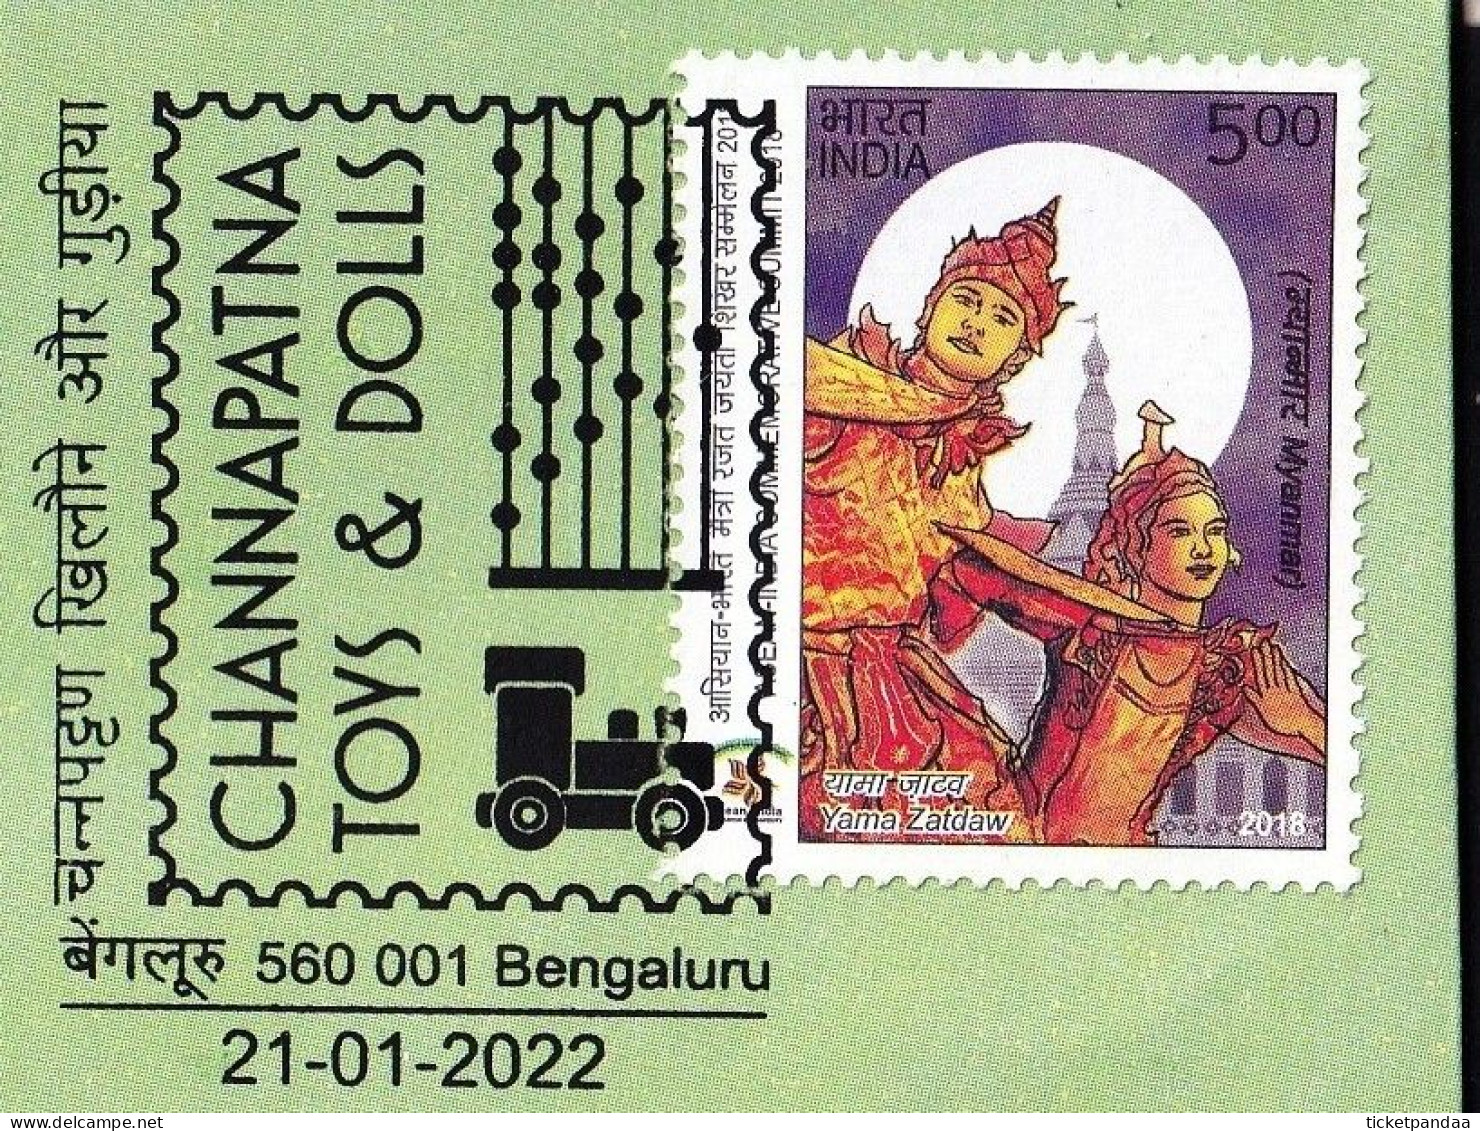 TOYS AND DOLLS- CHANNAPATNA TOYS - PICTORIAL POSTMARK- SPECIAL COVER-INDIA-BX4-31 - Marionette